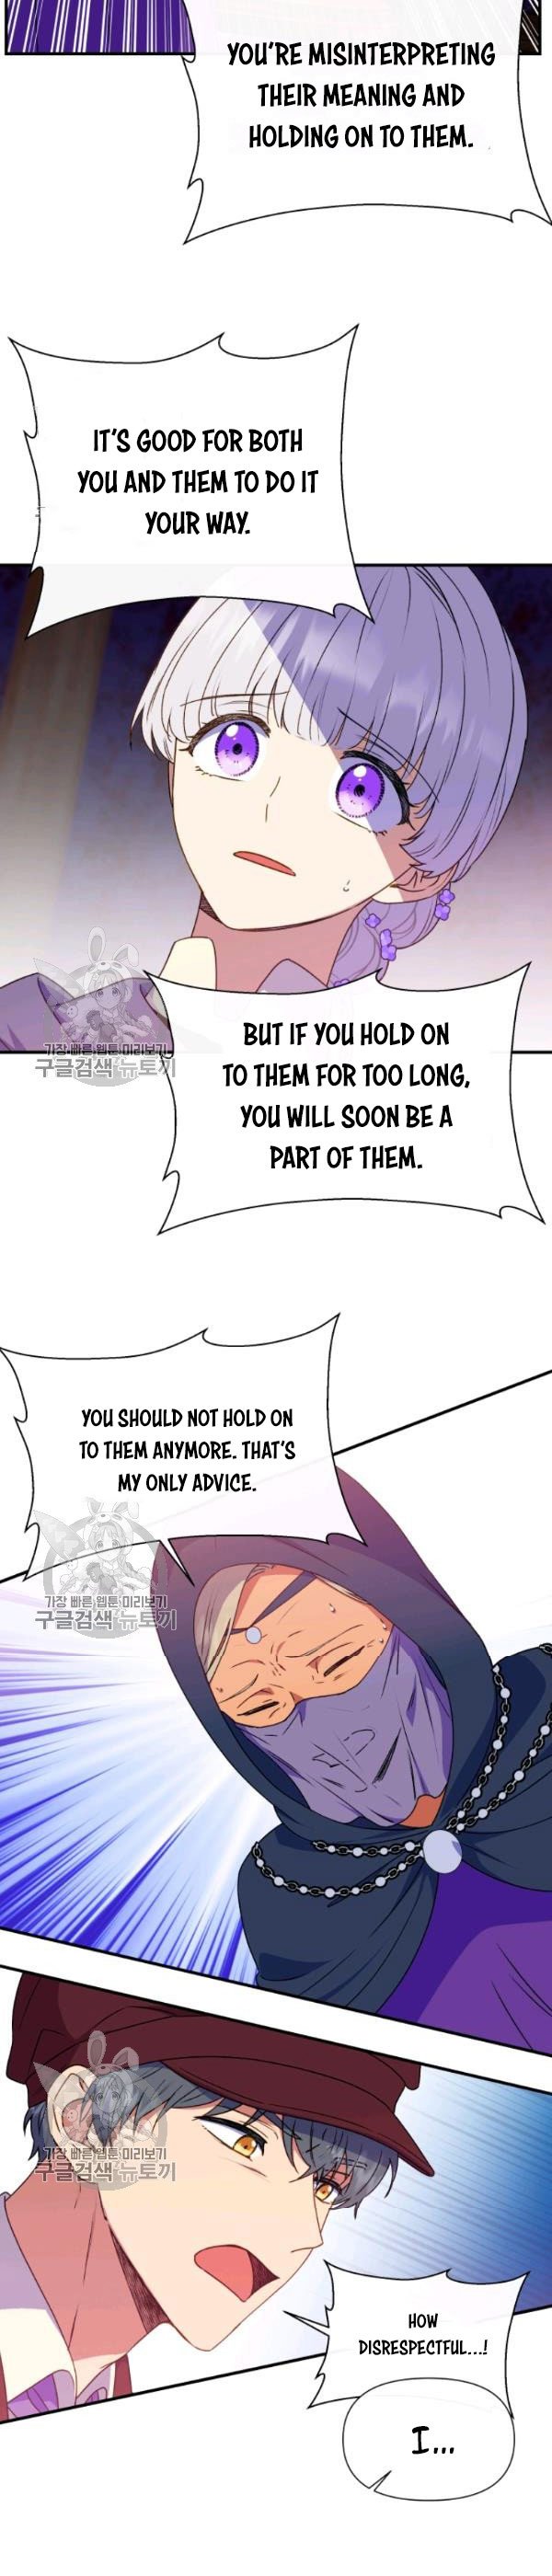 The Monster Duchess And Contract Princess - Page 2